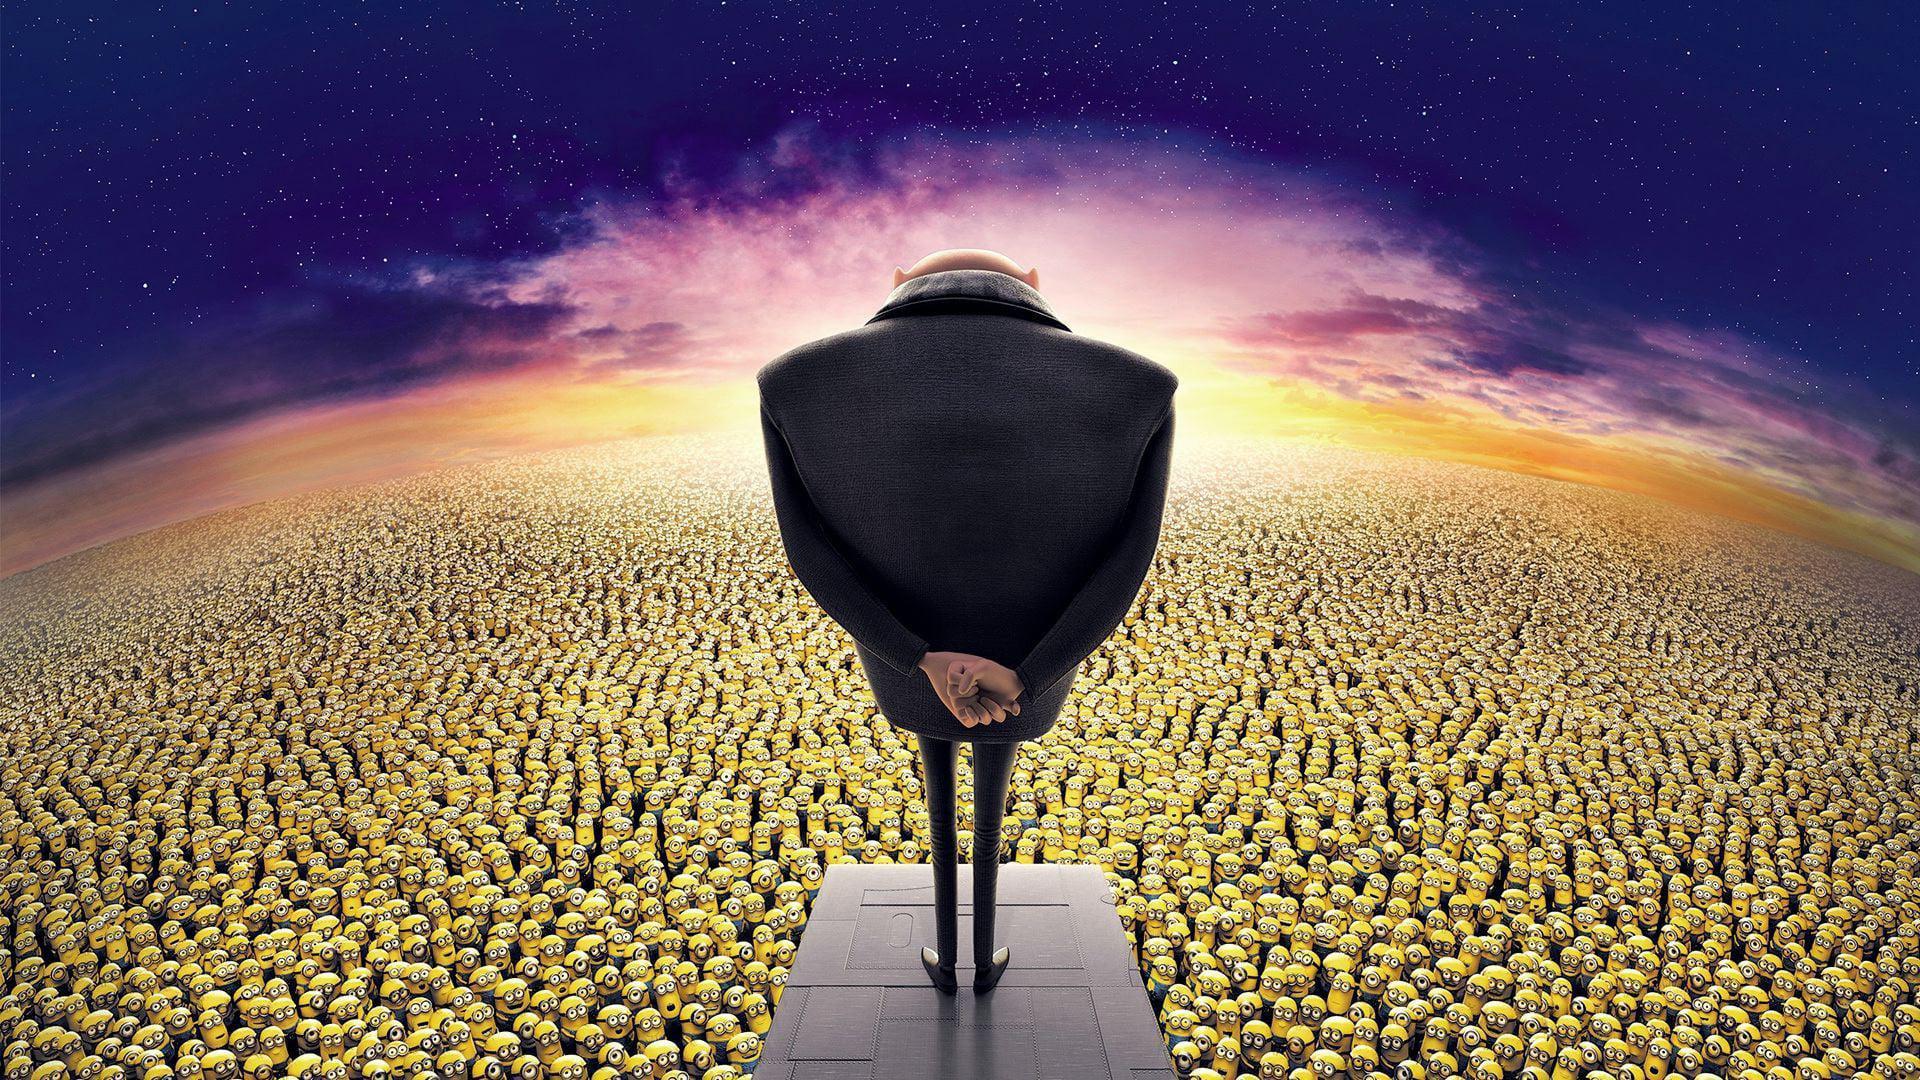 Backdrop Image for Despicable Me 2